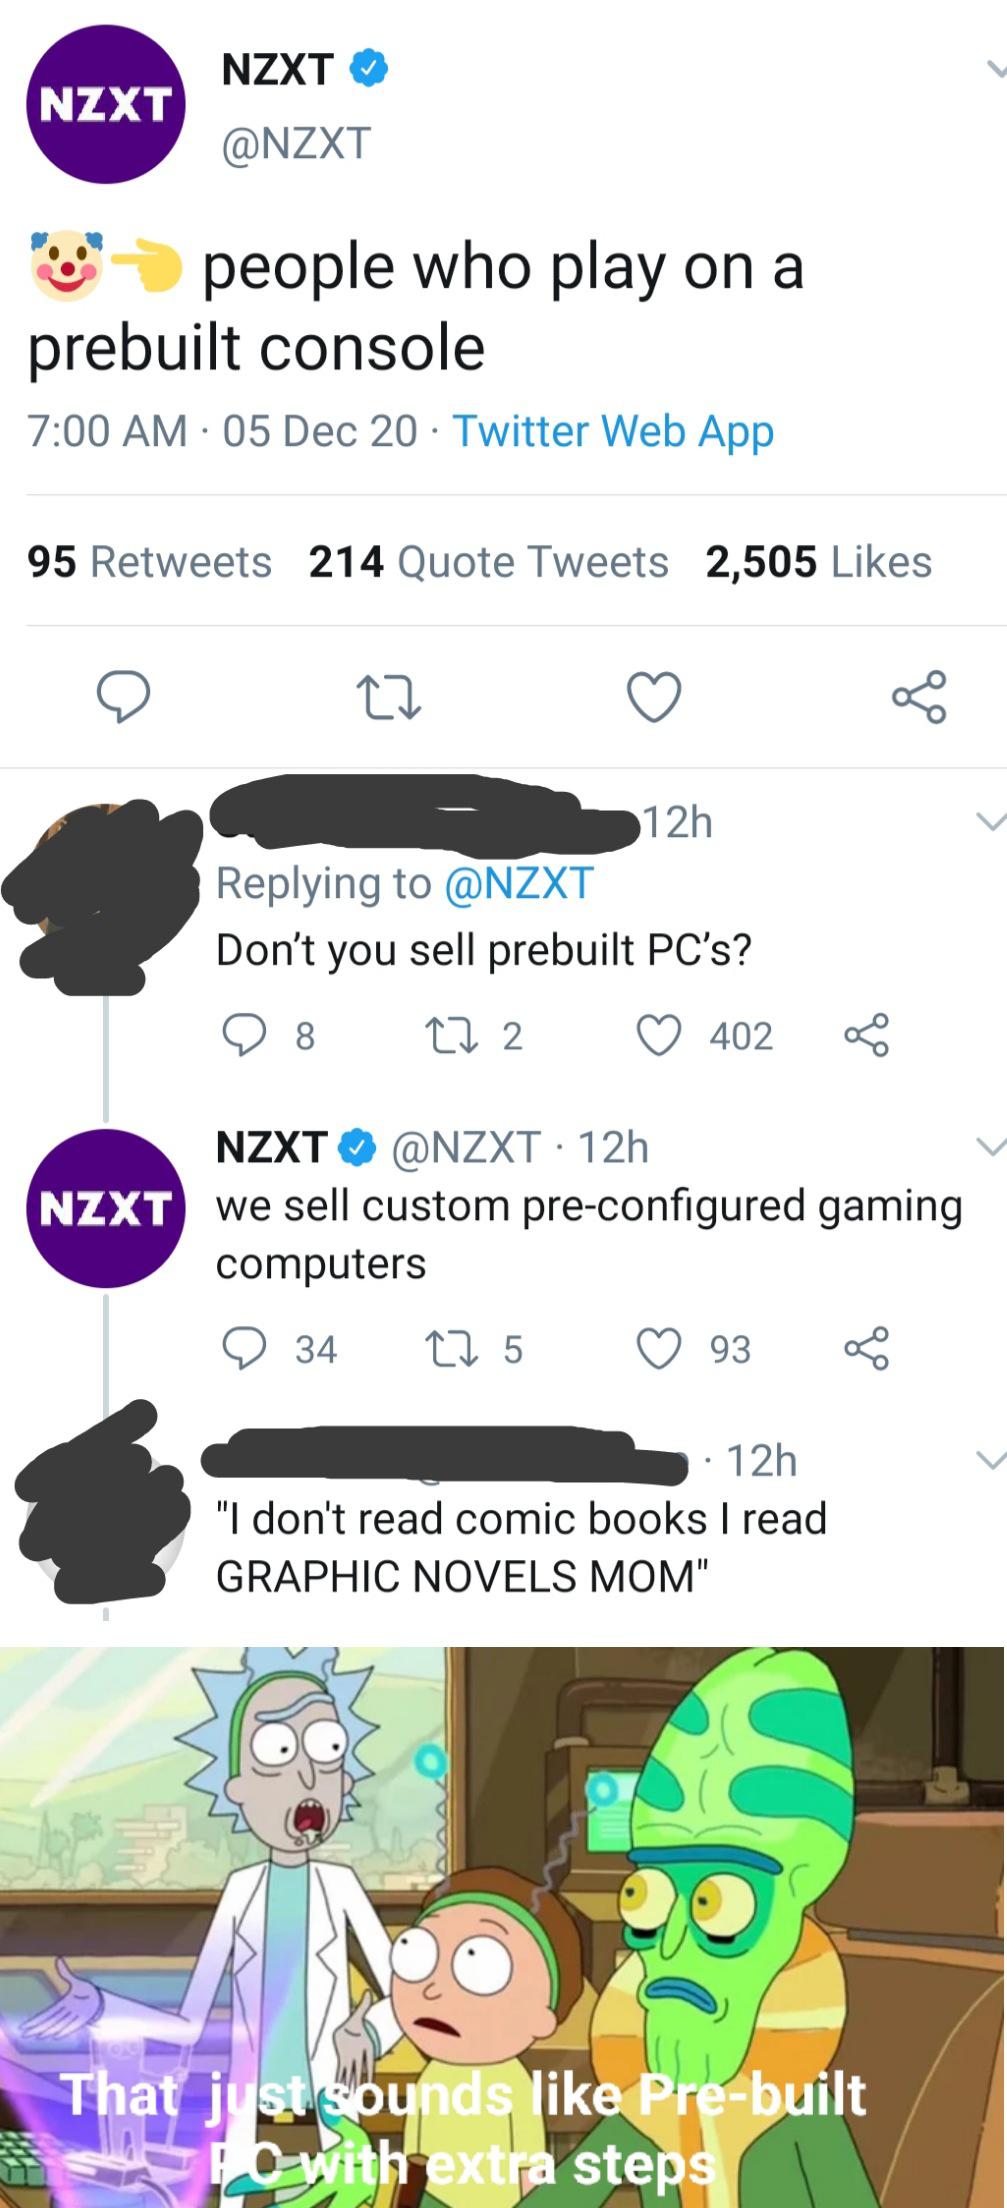 cartoon - Nzxt Nzxt people who play on a prebuilt console 05 Dec 20 Twitter Web App 95 214 Quote Tweets 2,505 12h Don't you sell prebuilt Pc's? 98 272 402 Nzxt 12h Nzxt we sell custom preconfigured gaming computers 34 12 5 93 8 . 12h "I don't read comic b